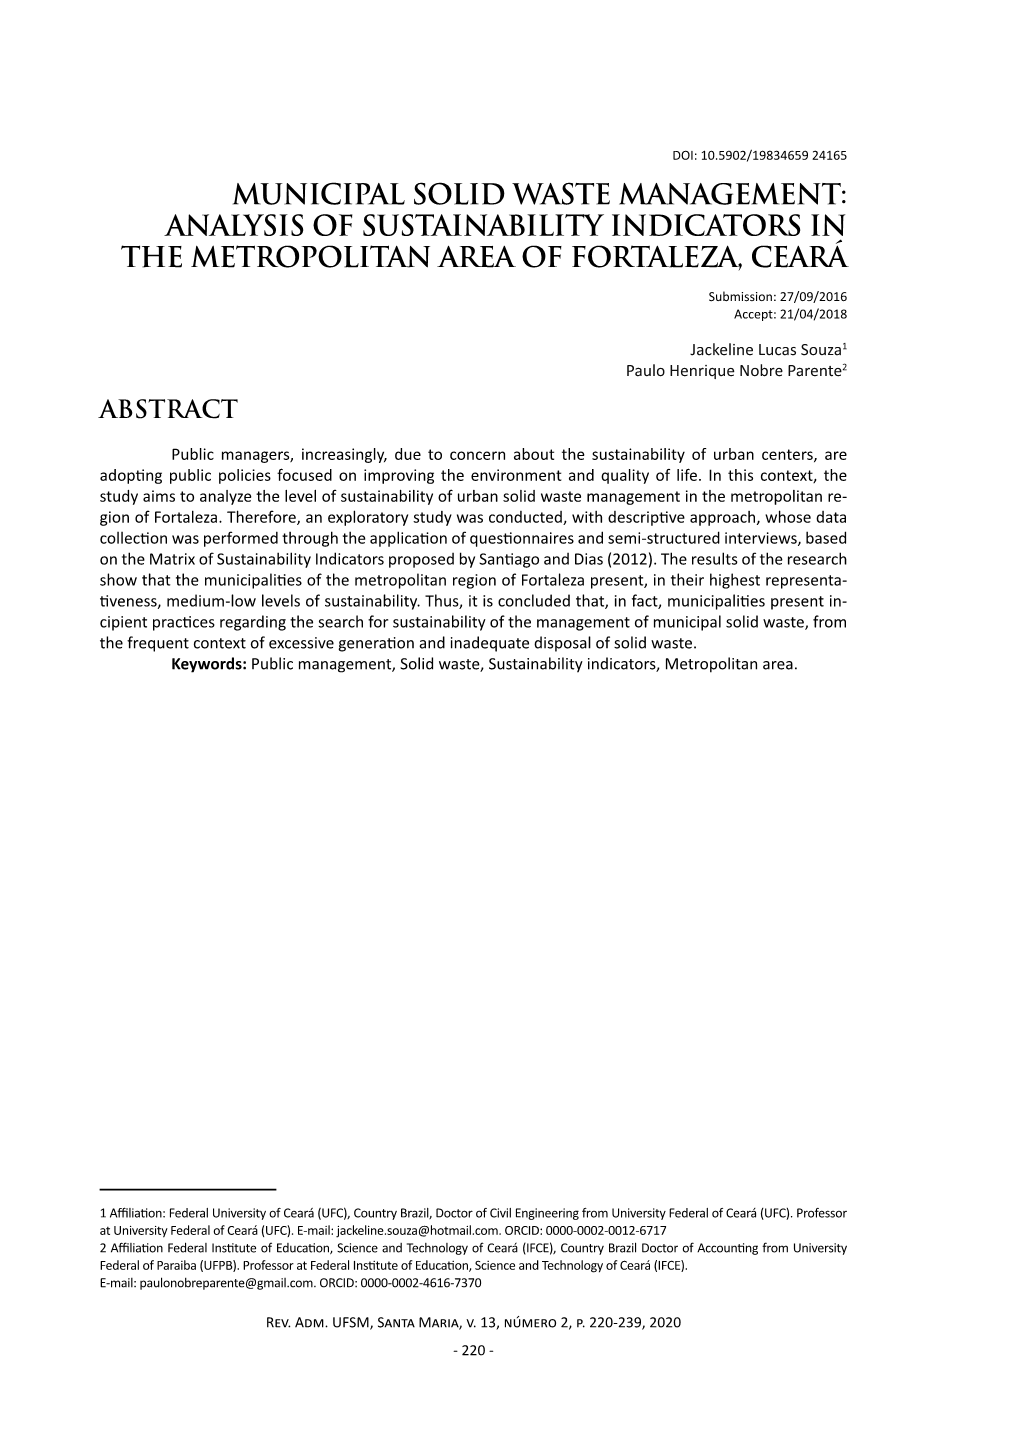 Municipal Solid Waste Management: Analysis of Sustainability Indicators in the Metropolitan Area of Fortaleza, Ceará